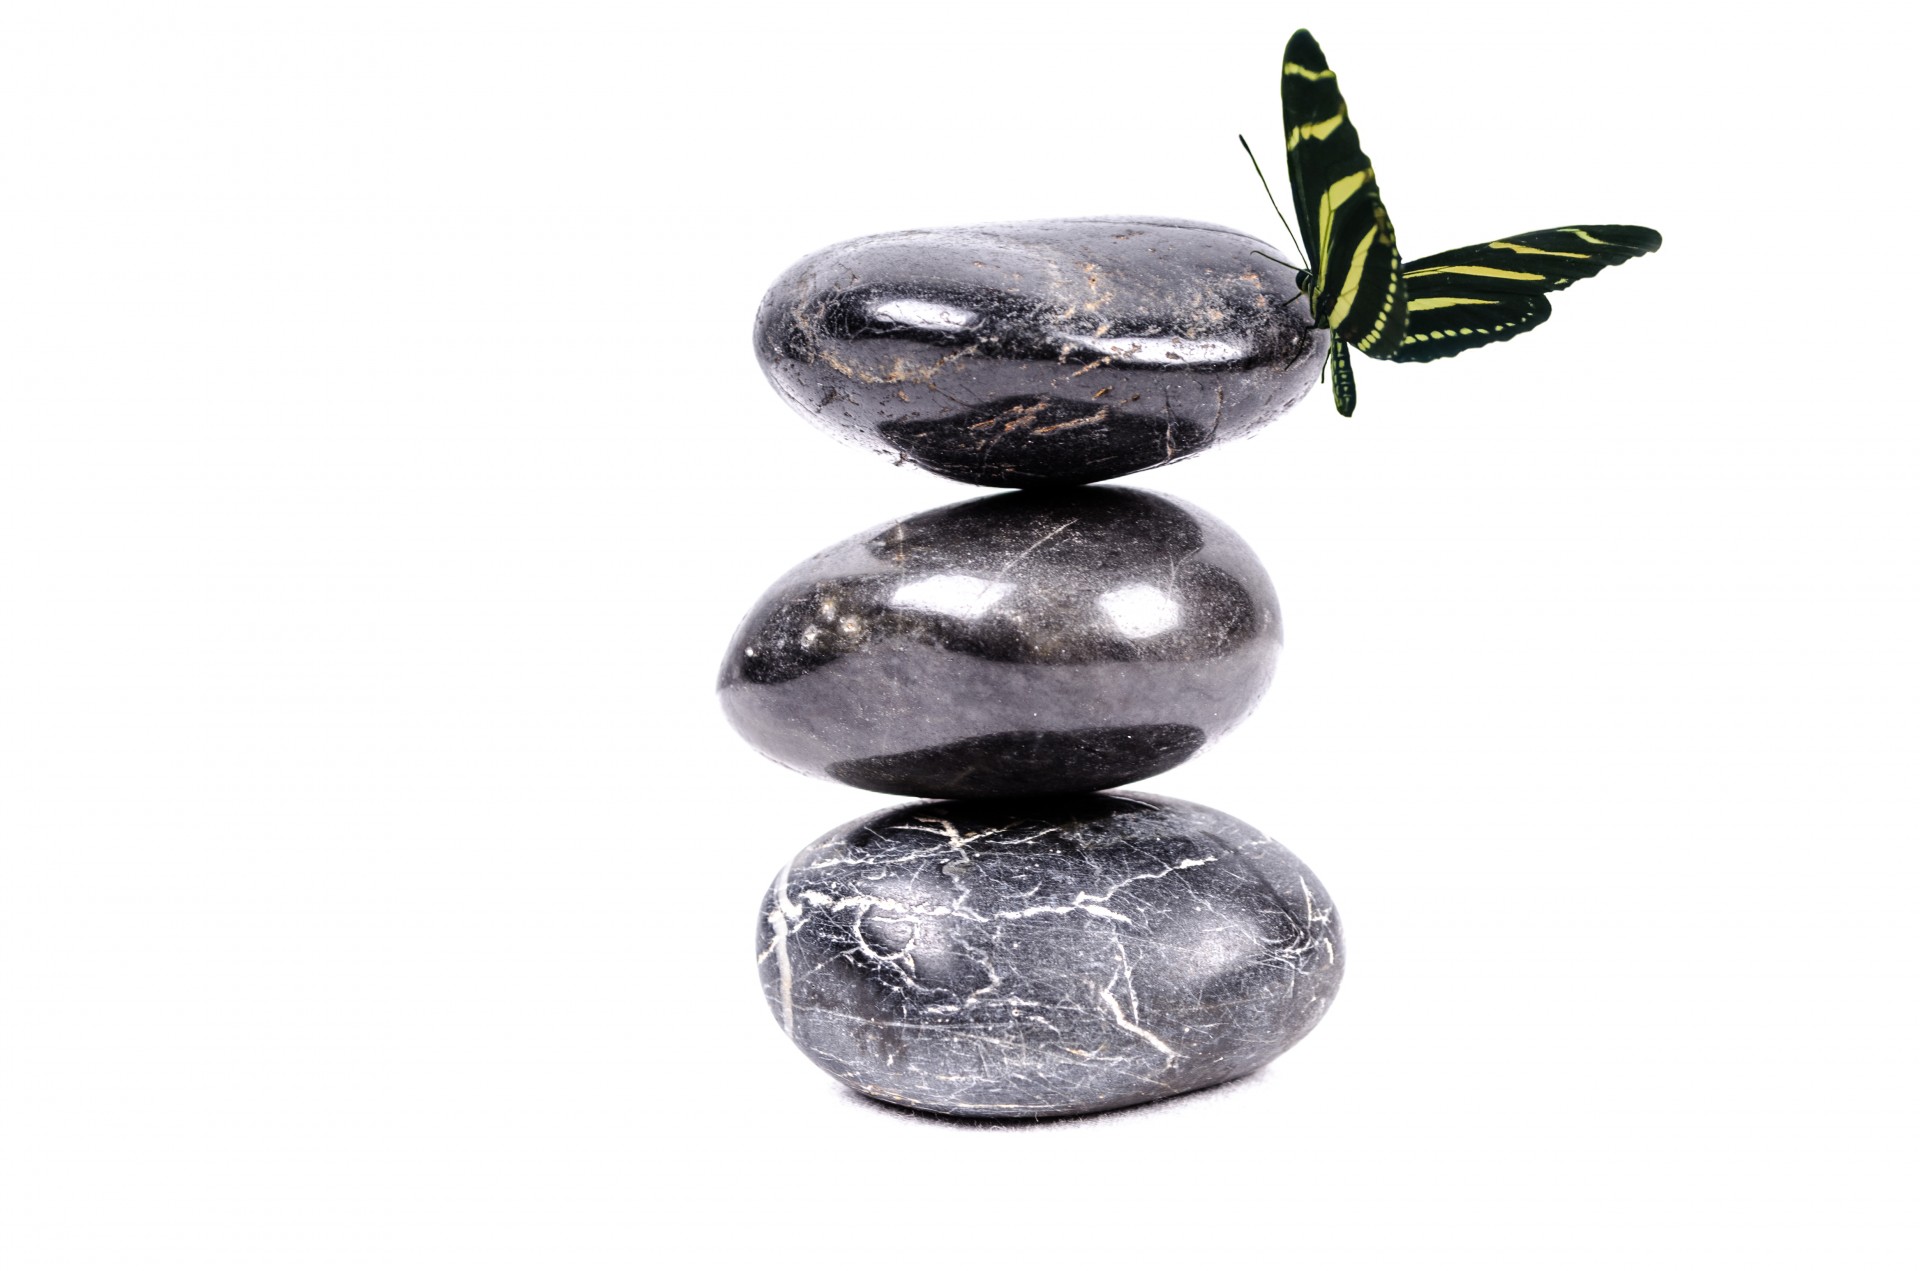 Zen Stones And Butterfly